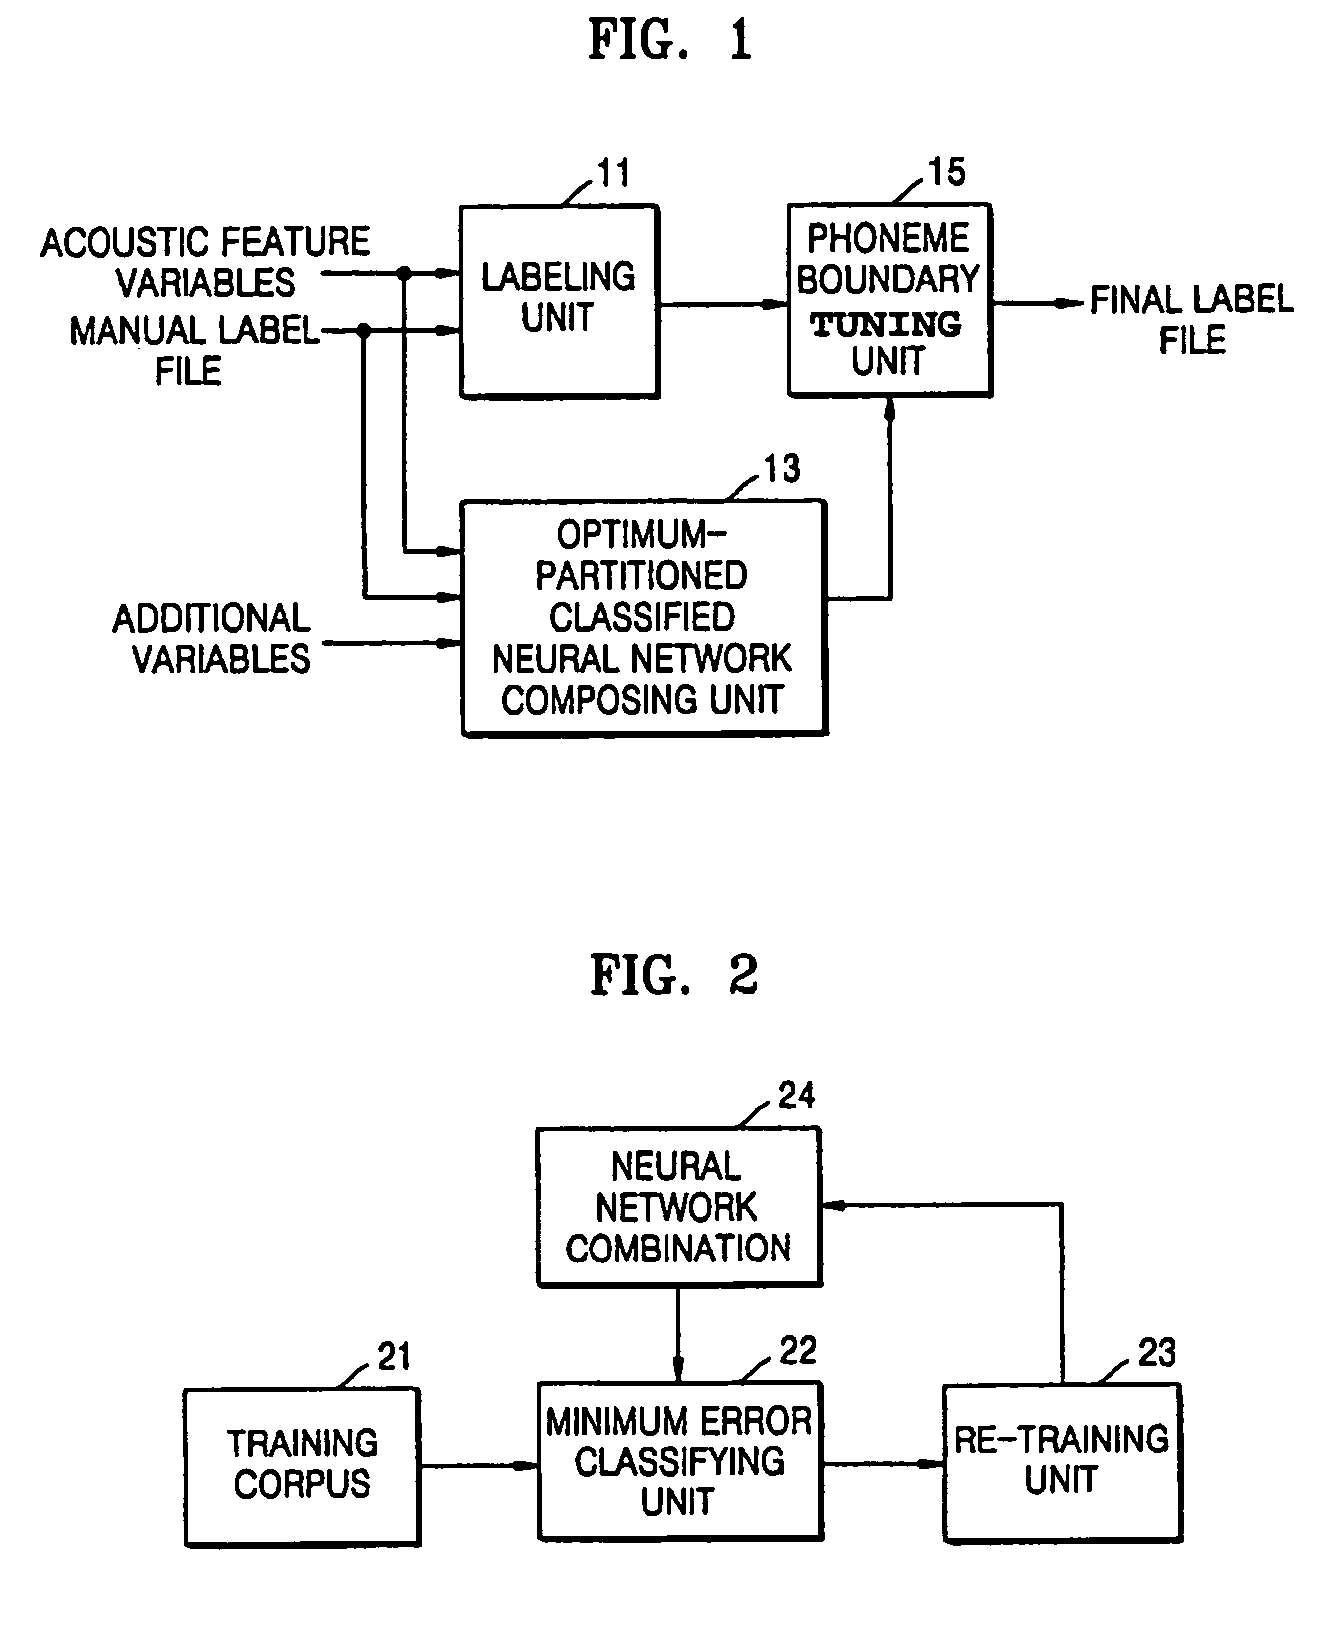 Method of setting optimum-partitioned classified neural network and method and apparatus for automatic labeling using optimum-partitioned classified neural network